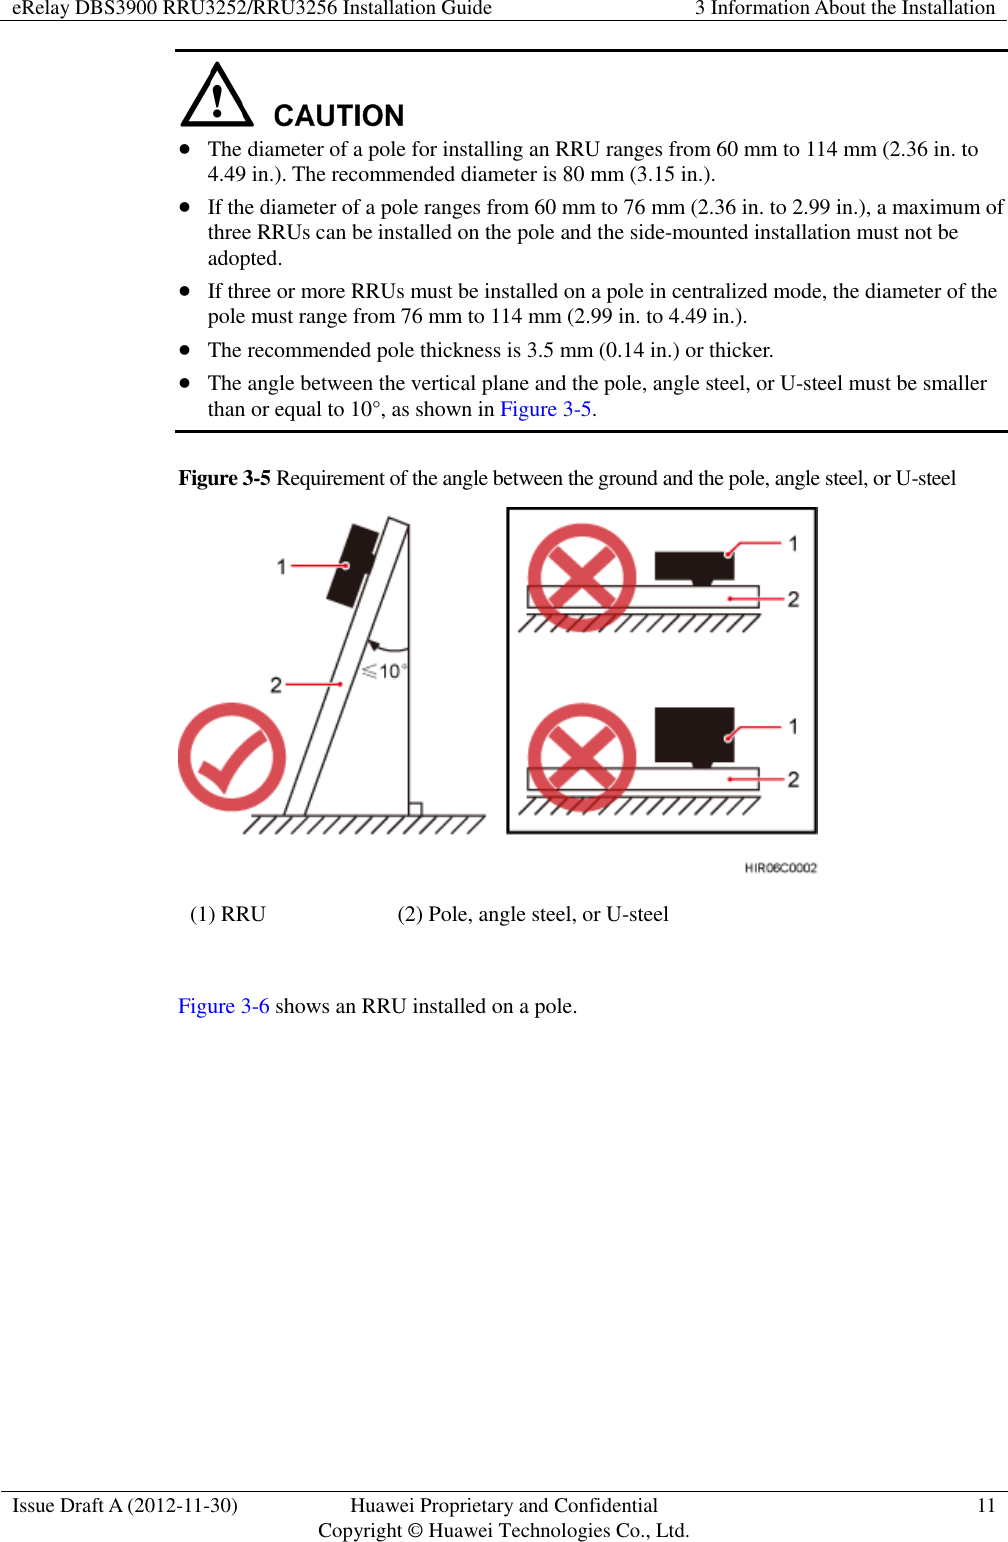 eRelay DBS3900 RRU3252/RRU3256 Installation Guide 3 Information About the Installation  Issue Draft A (2012-11-30) Huawei Proprietary and Confidential                                     Copyright © Huawei Technologies Co., Ltd. 11    The diameter of a pole for installing an RRU ranges from 60 mm to 114 mm (2.36 in. to 4.49 in.). The recommended diameter is 80 mm (3.15 in.).  If the diameter of a pole ranges from 60 mm to 76 mm (2.36 in. to 2.99 in.), a maximum of three RRUs can be installed on the pole and the side-mounted installation must not be adopted.  If three or more RRUs must be installed on a pole in centralized mode, the diameter of the pole must range from 76 mm to 114 mm (2.99 in. to 4.49 in.).  The recommended pole thickness is 3.5 mm (0.14 in.) or thicker.  The angle between the vertical plane and the pole, angle steel, or U-steel must be smaller than or equal to 10°, as shown in Figure 3-5. Figure 3-5 Requirement of the angle between the ground and the pole, angle steel, or U-steel  (1) RRU (2) Pole, angle steel, or U-steel  Figure 3-6 shows an RRU installed on a pole. 